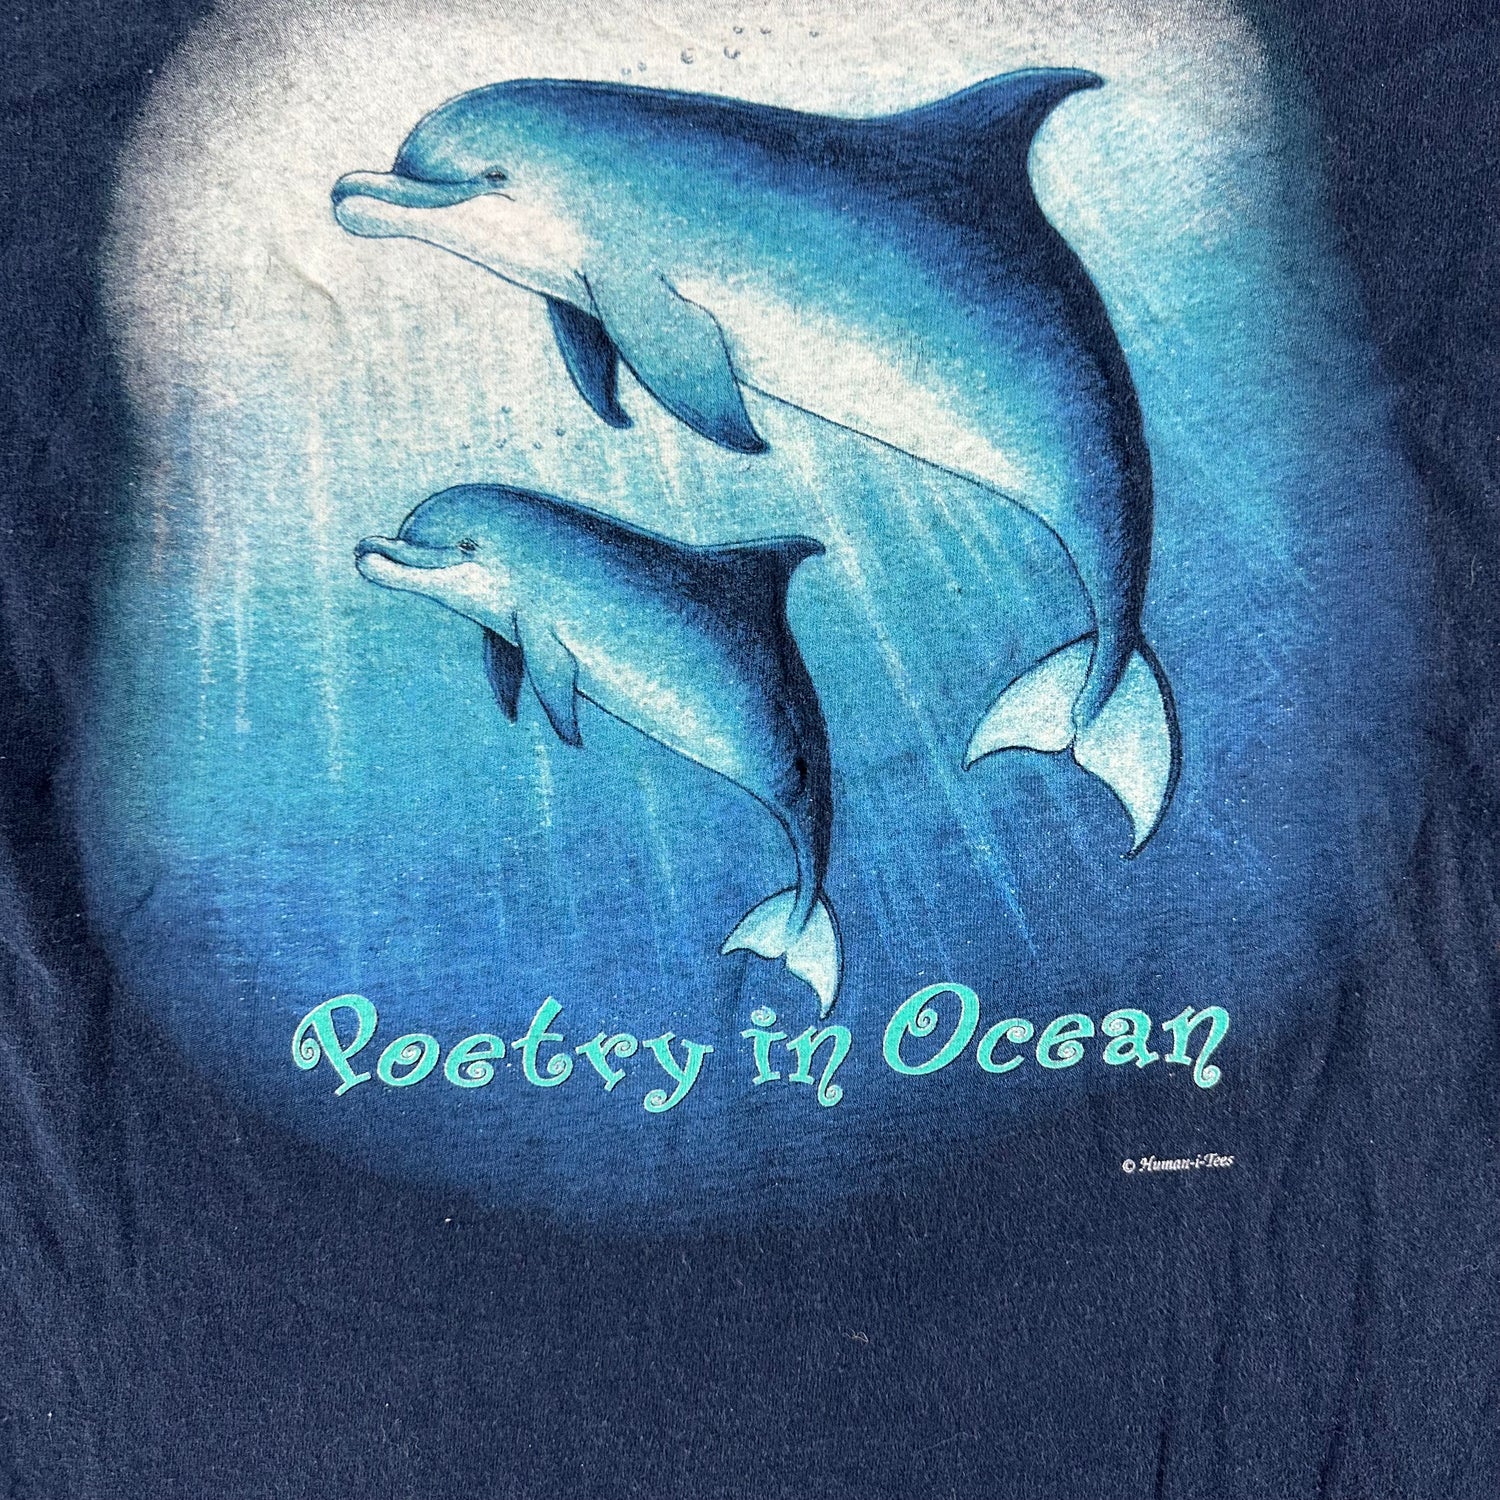 Vintage 1990s Dolphin T-shirt size Large